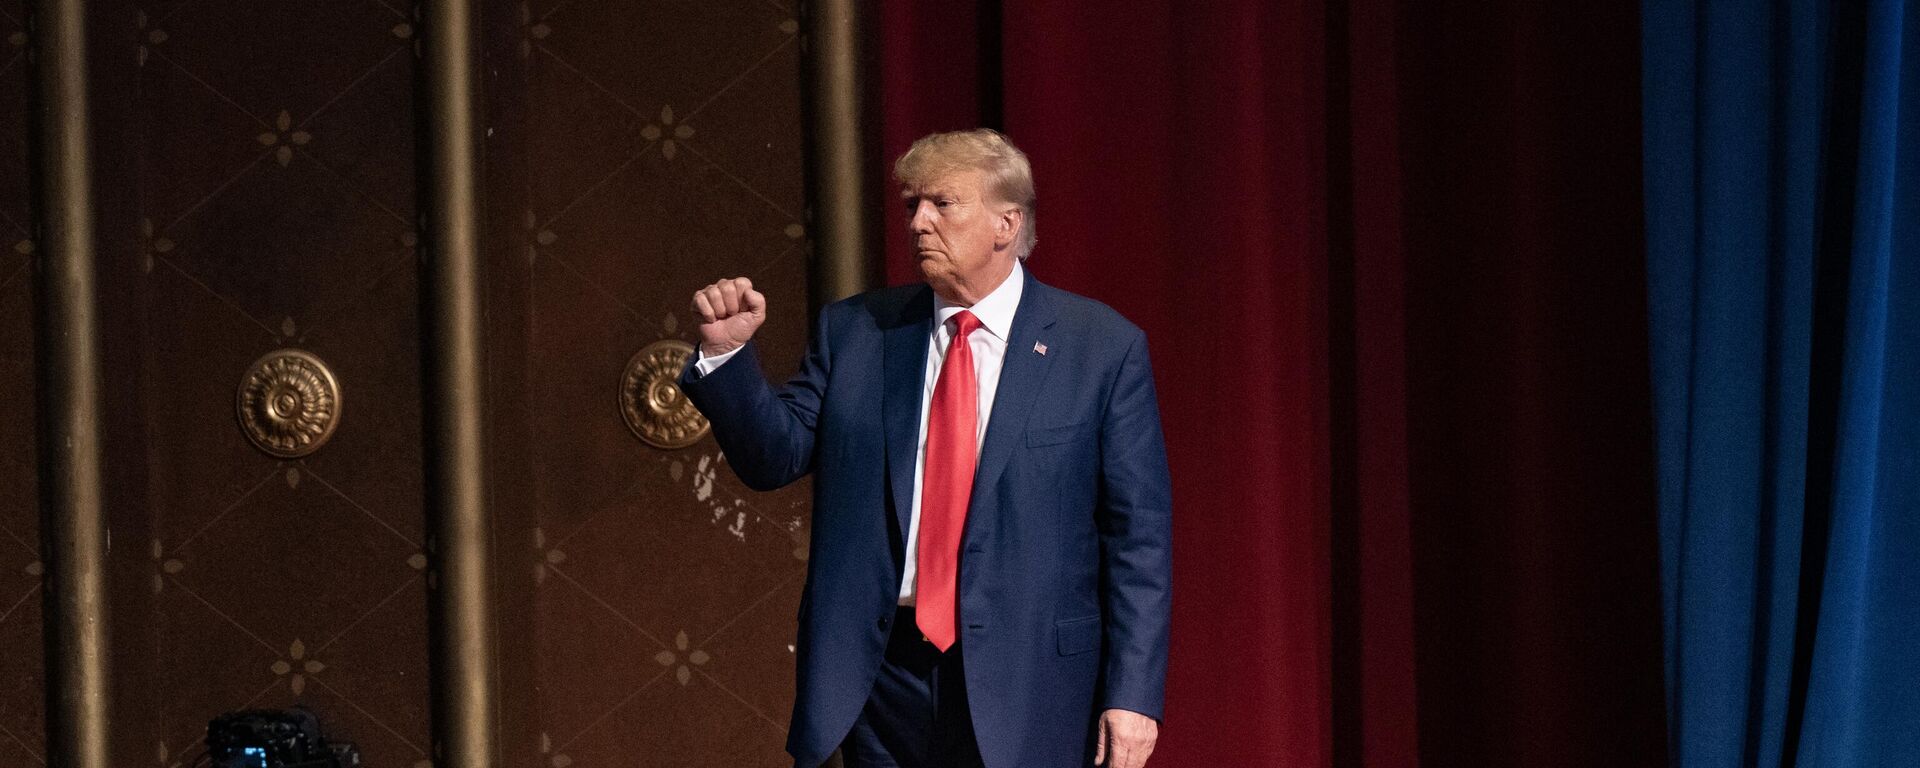 Former US President and 2024 Presidential hopeful Donald Trump gestures as he leaves after speaking at the North Carolina Republican Party Convention in Greensboro, North Carolina, on June 10, 2023 - Sputnik International, 1920, 11.06.2023